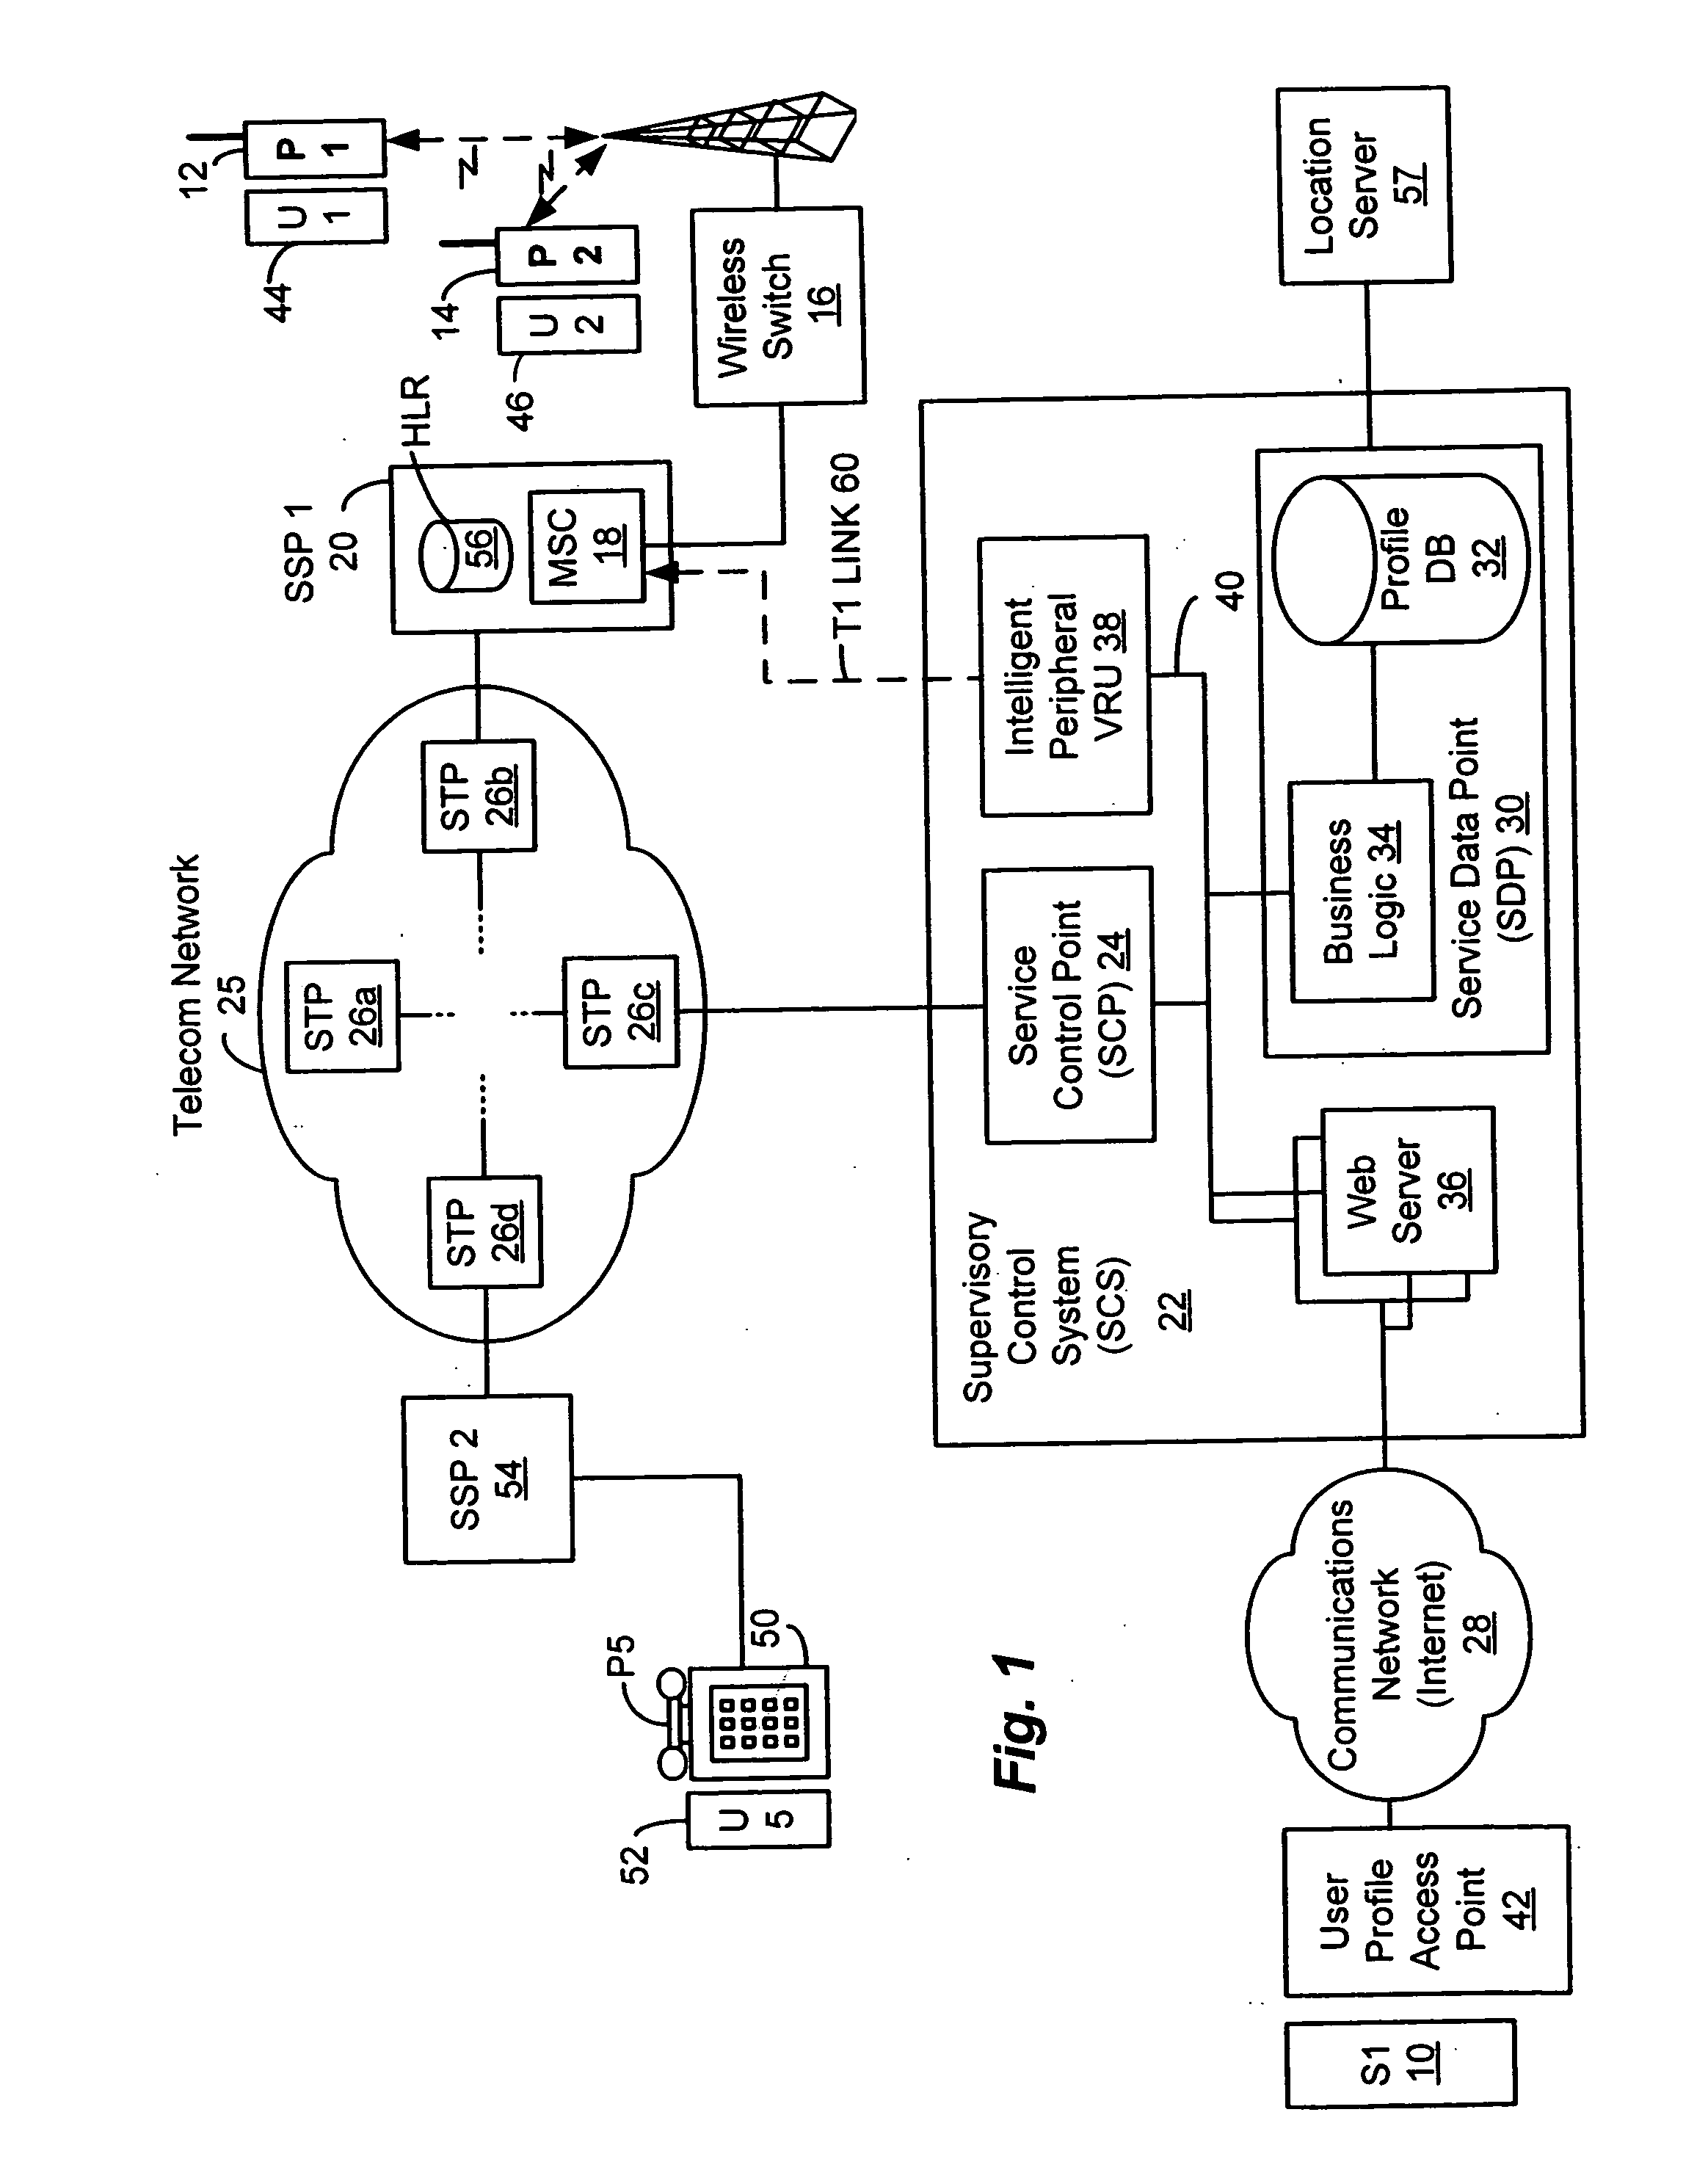 Method and system for providing supervisory control over wireless phone usage